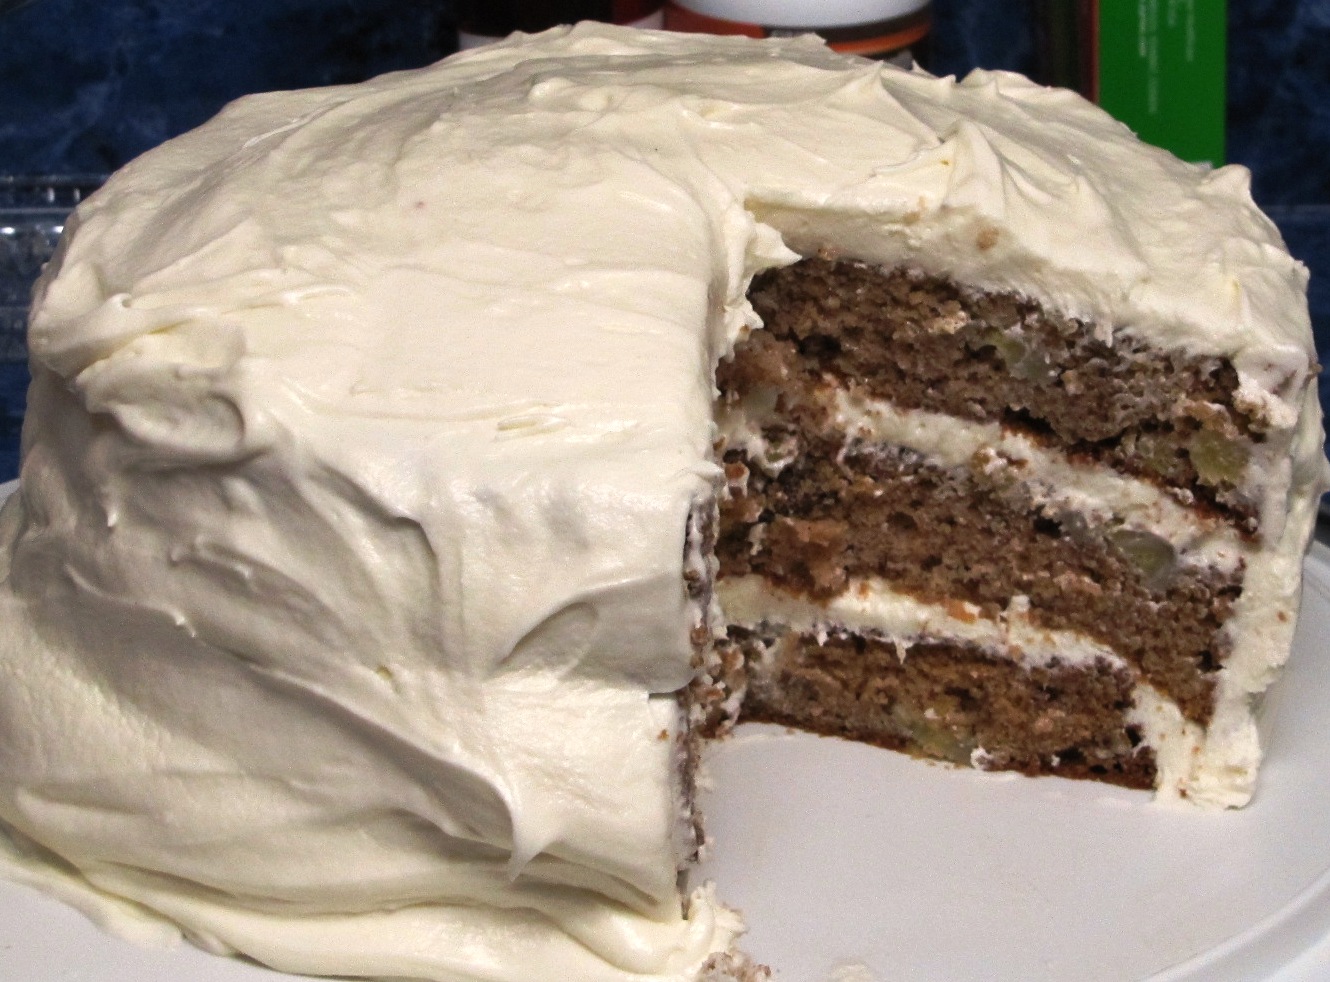 Hummingbird Cake With Cream Cheese Frosting (Southern Food)